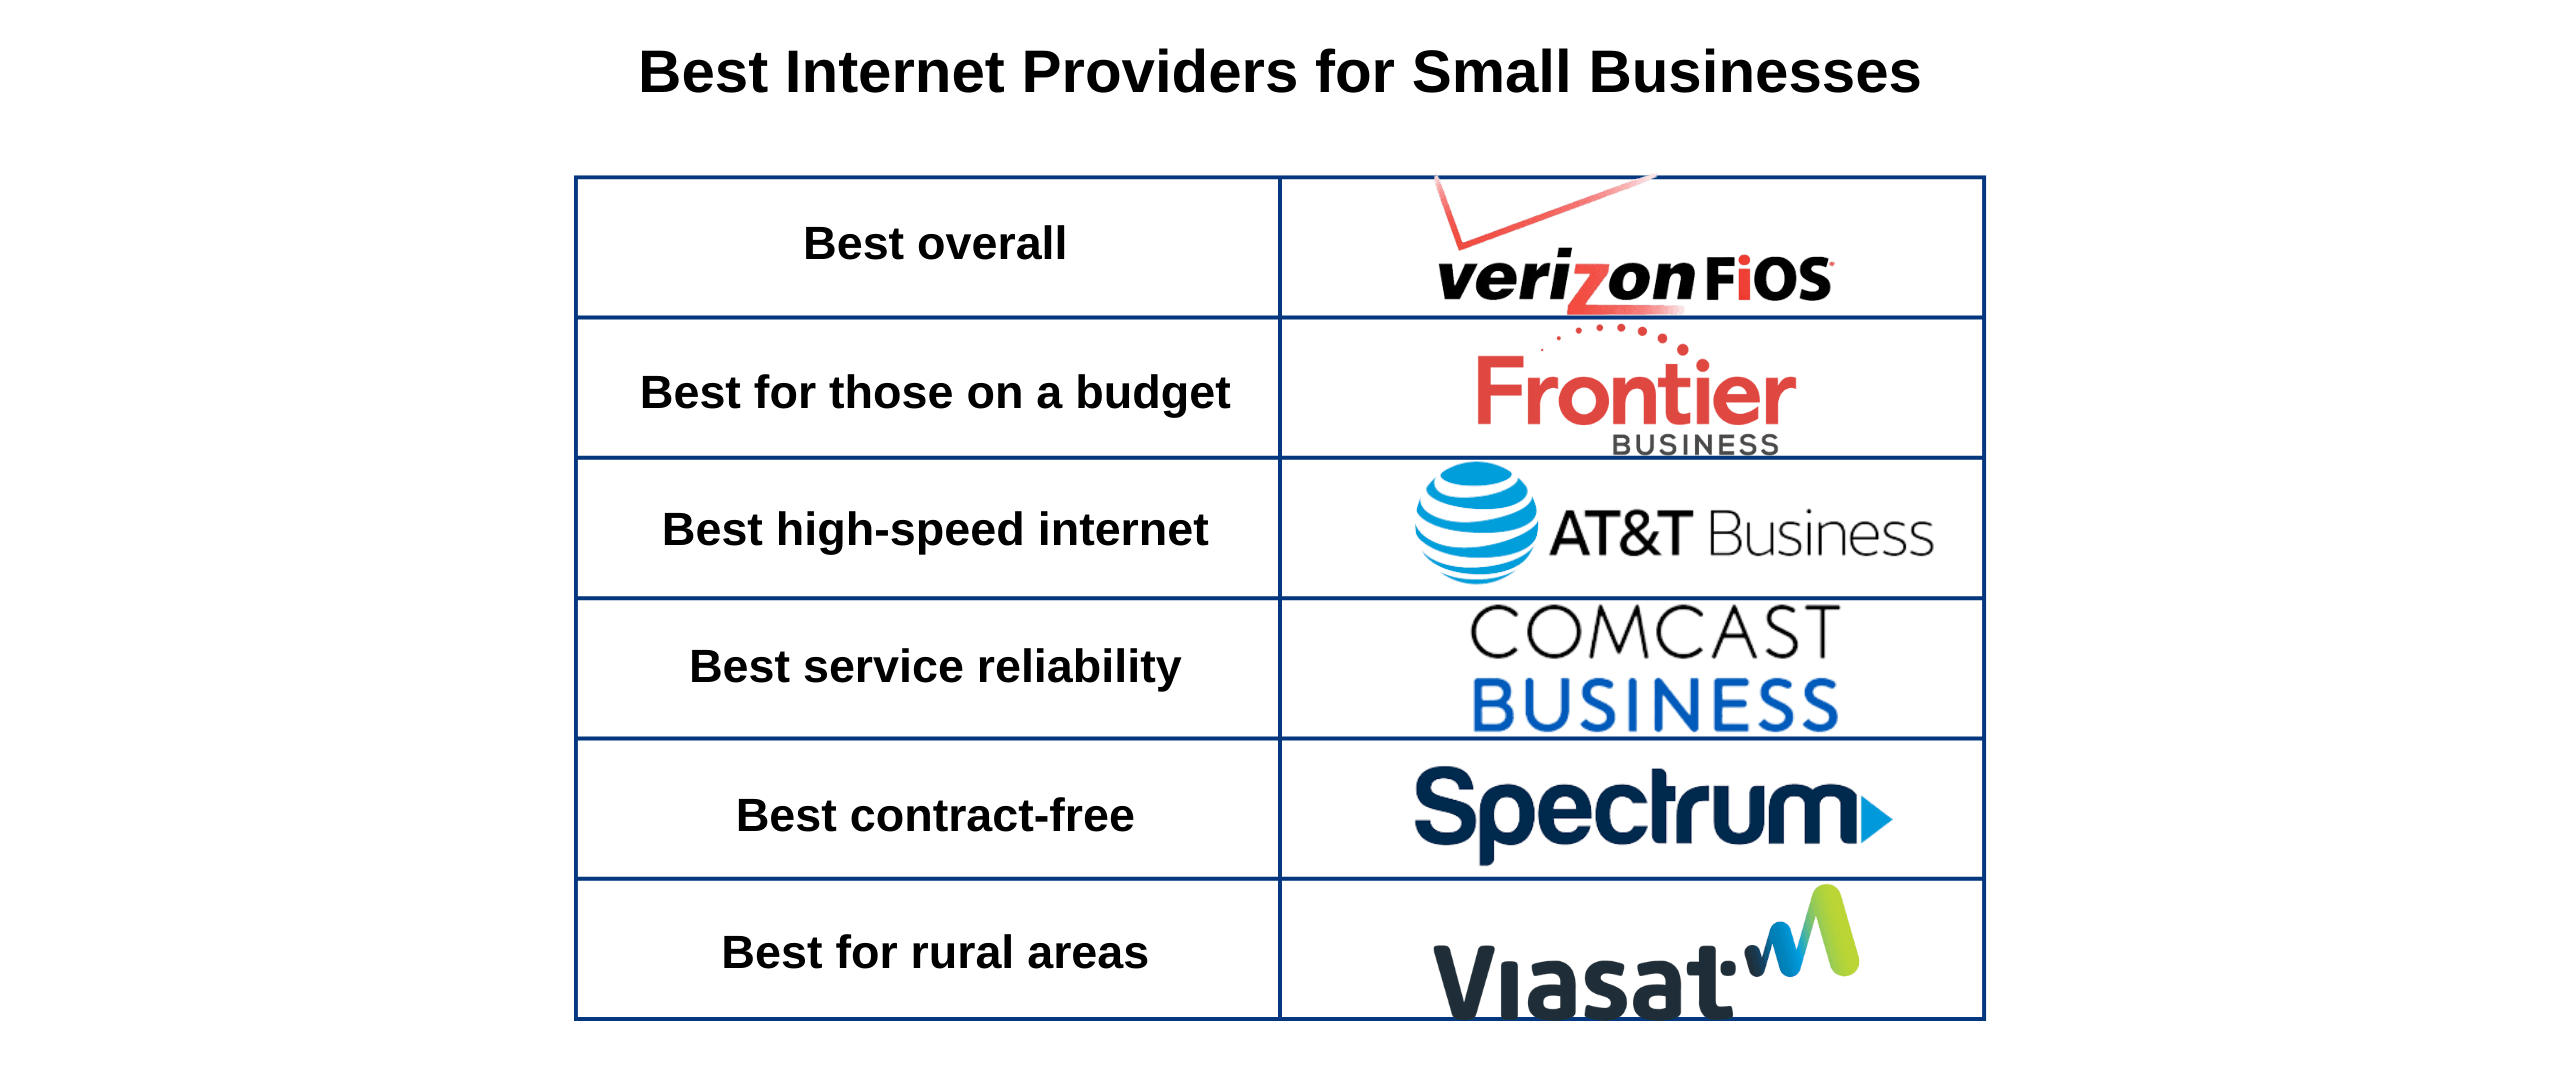 Best Internet Providers for Small Businesses 2022